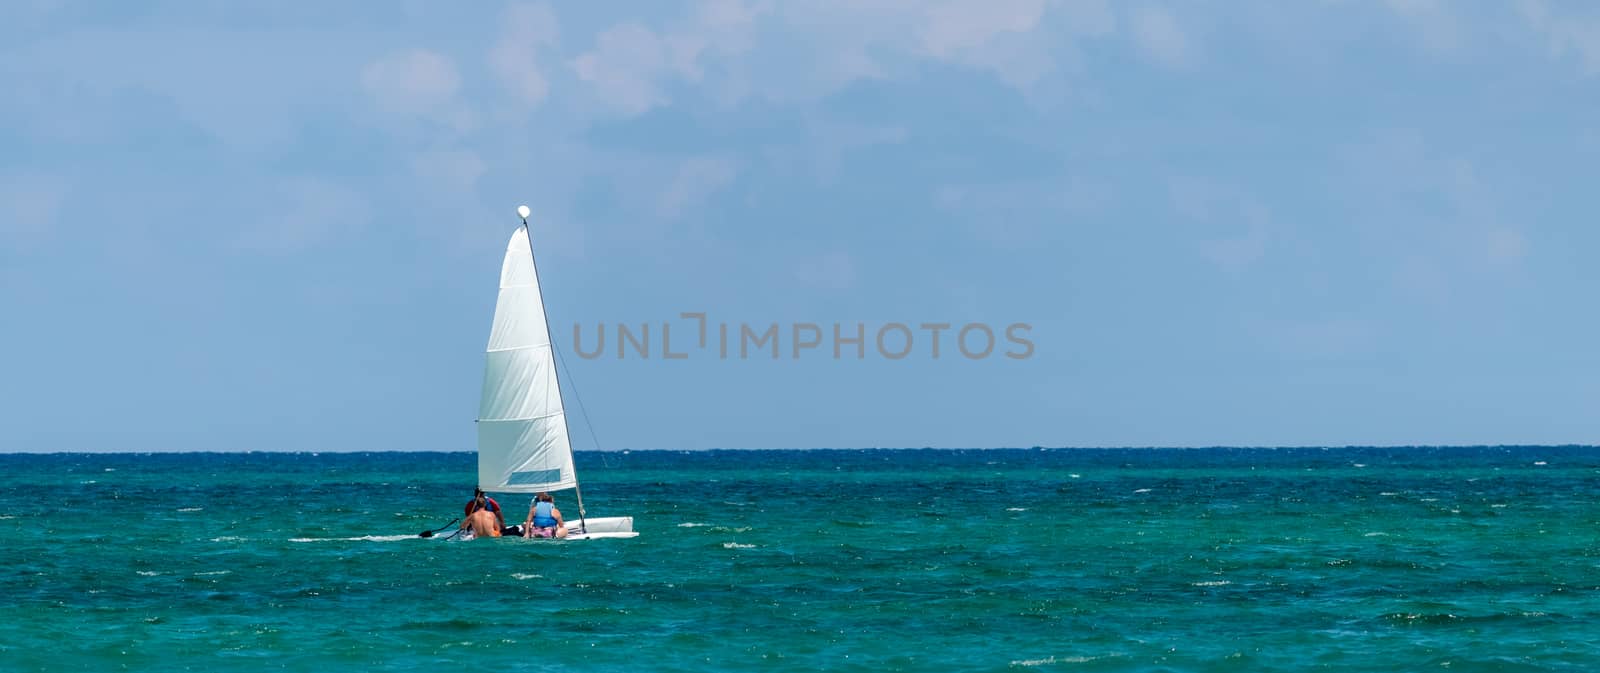 Nautical background of a white sailboat in bright sunlight, on blue ocean water, with space for text on left